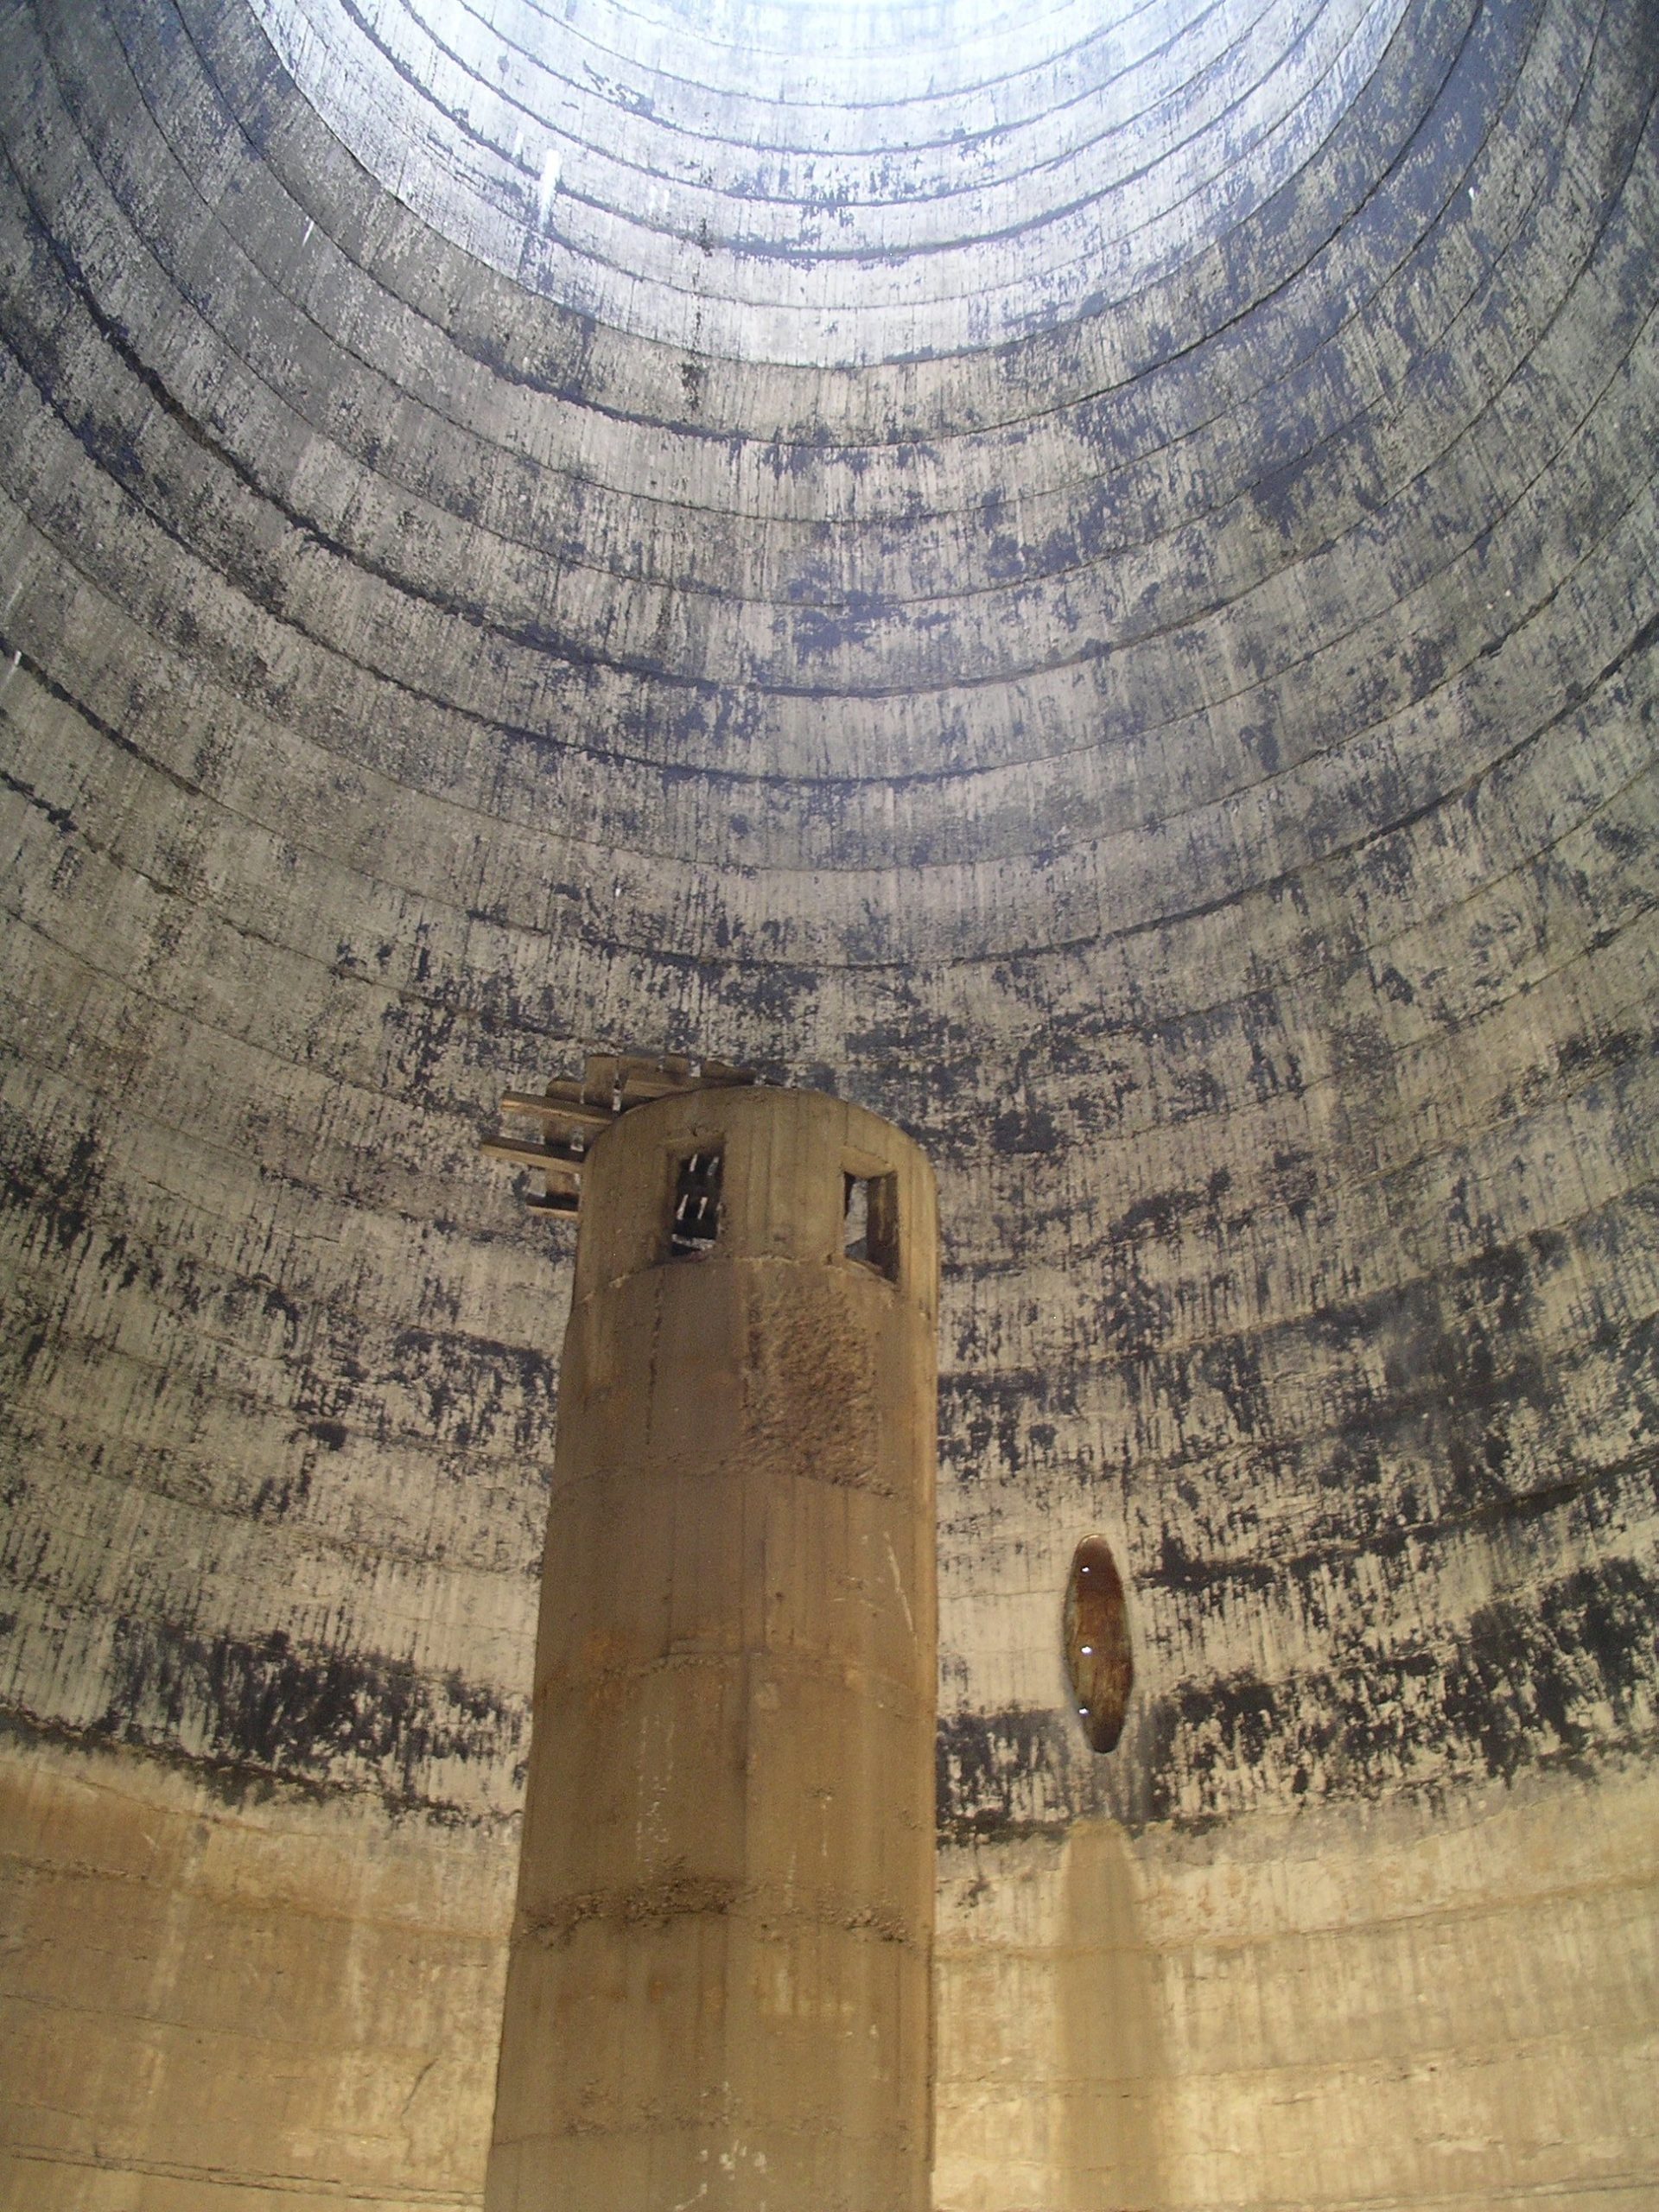 Inside view of the cooling tower with bare walls stripped of former equipment